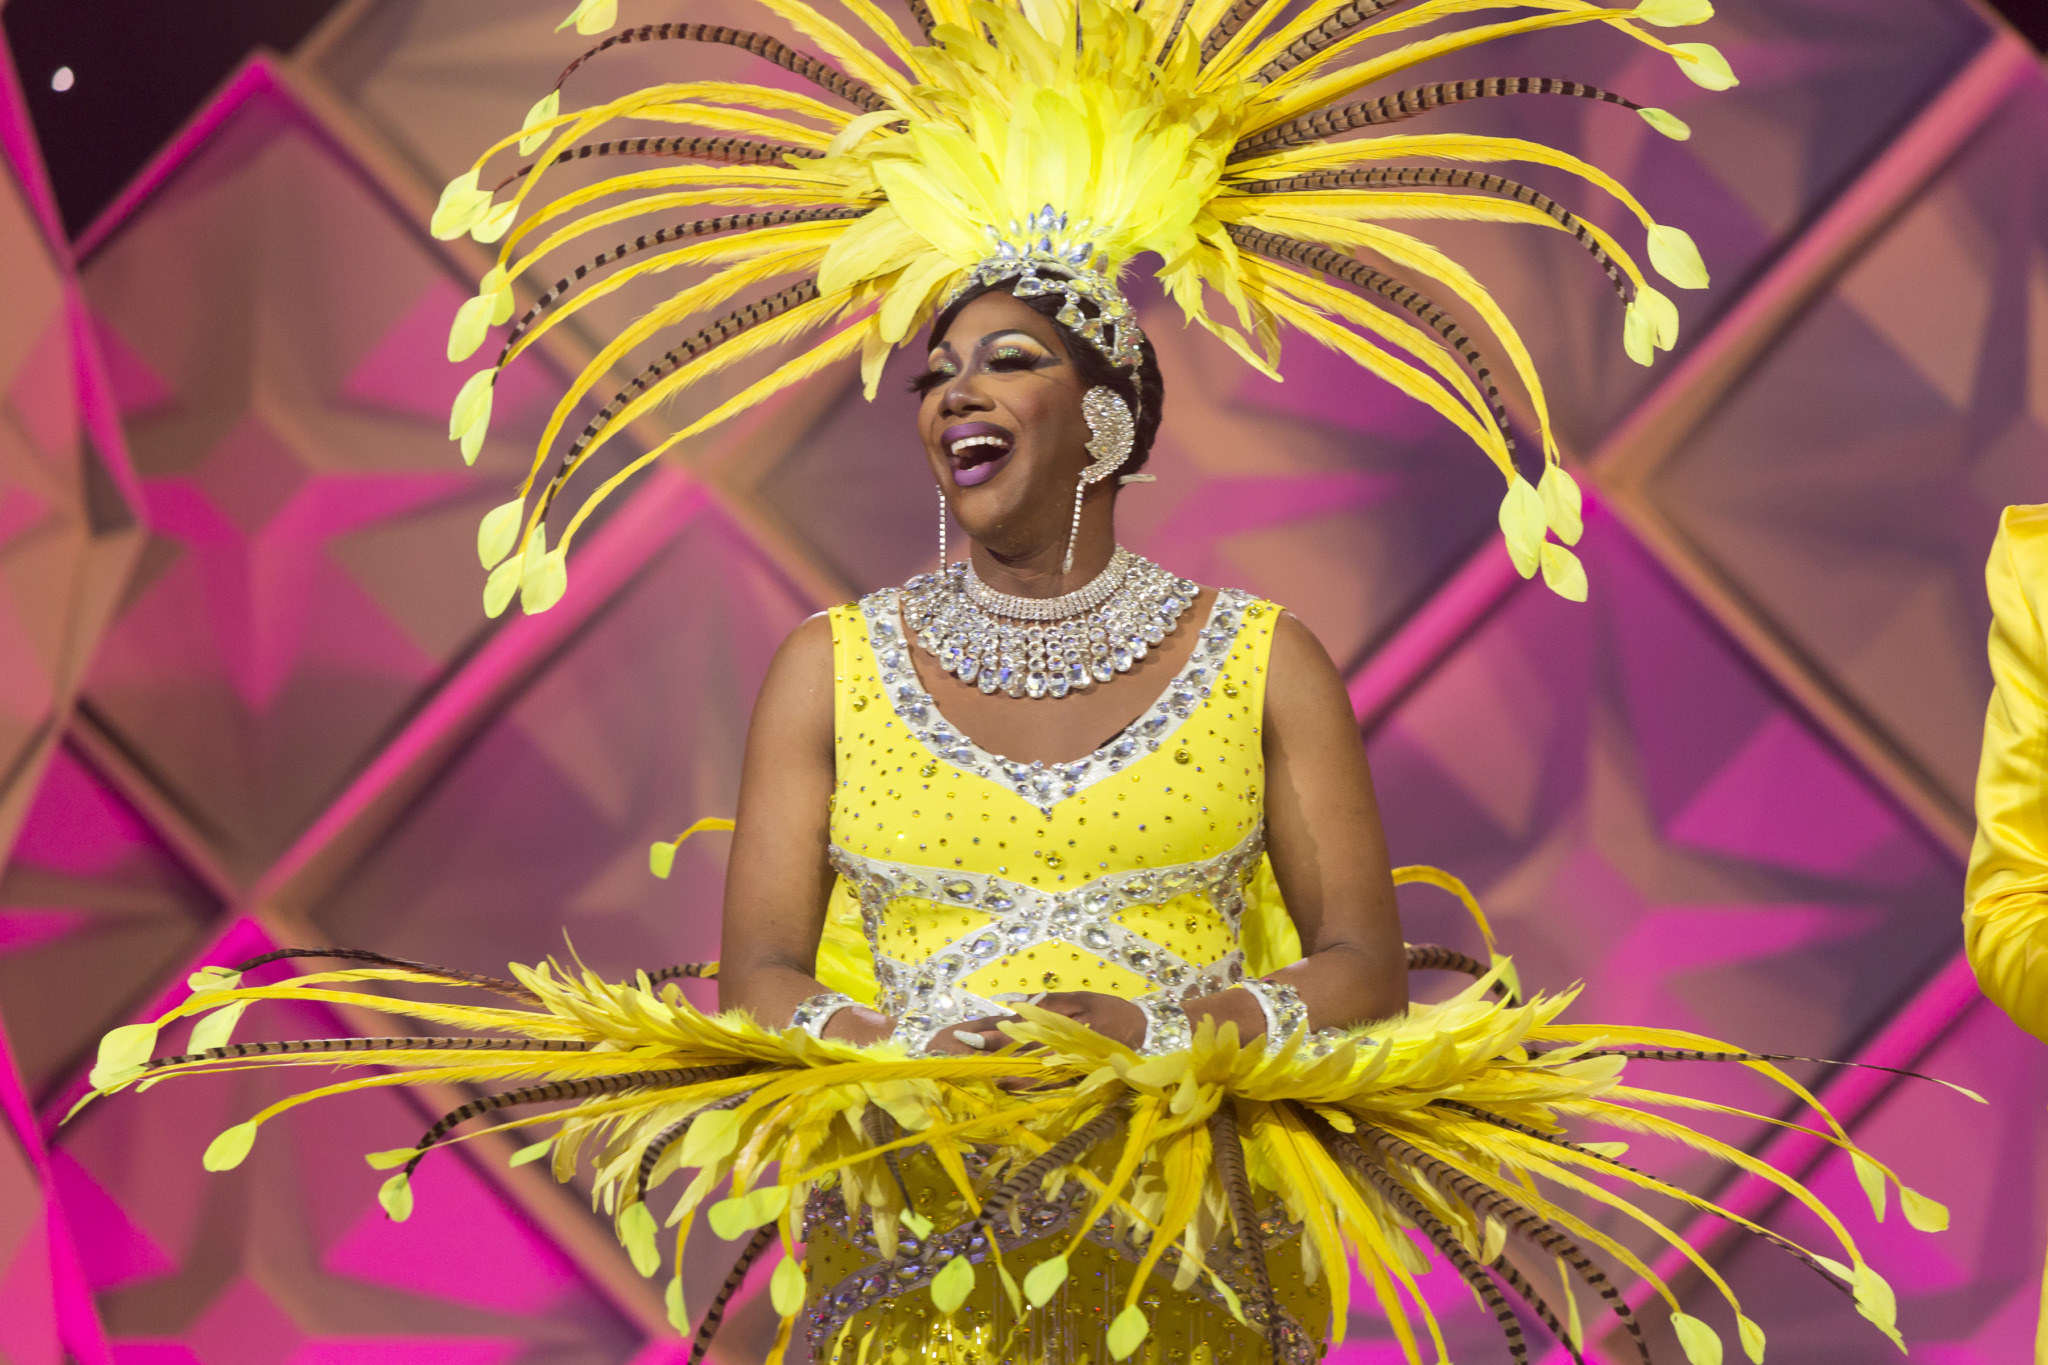 Drag queen with beautiful yellow outfit on with giant yellow feathers as a head piece